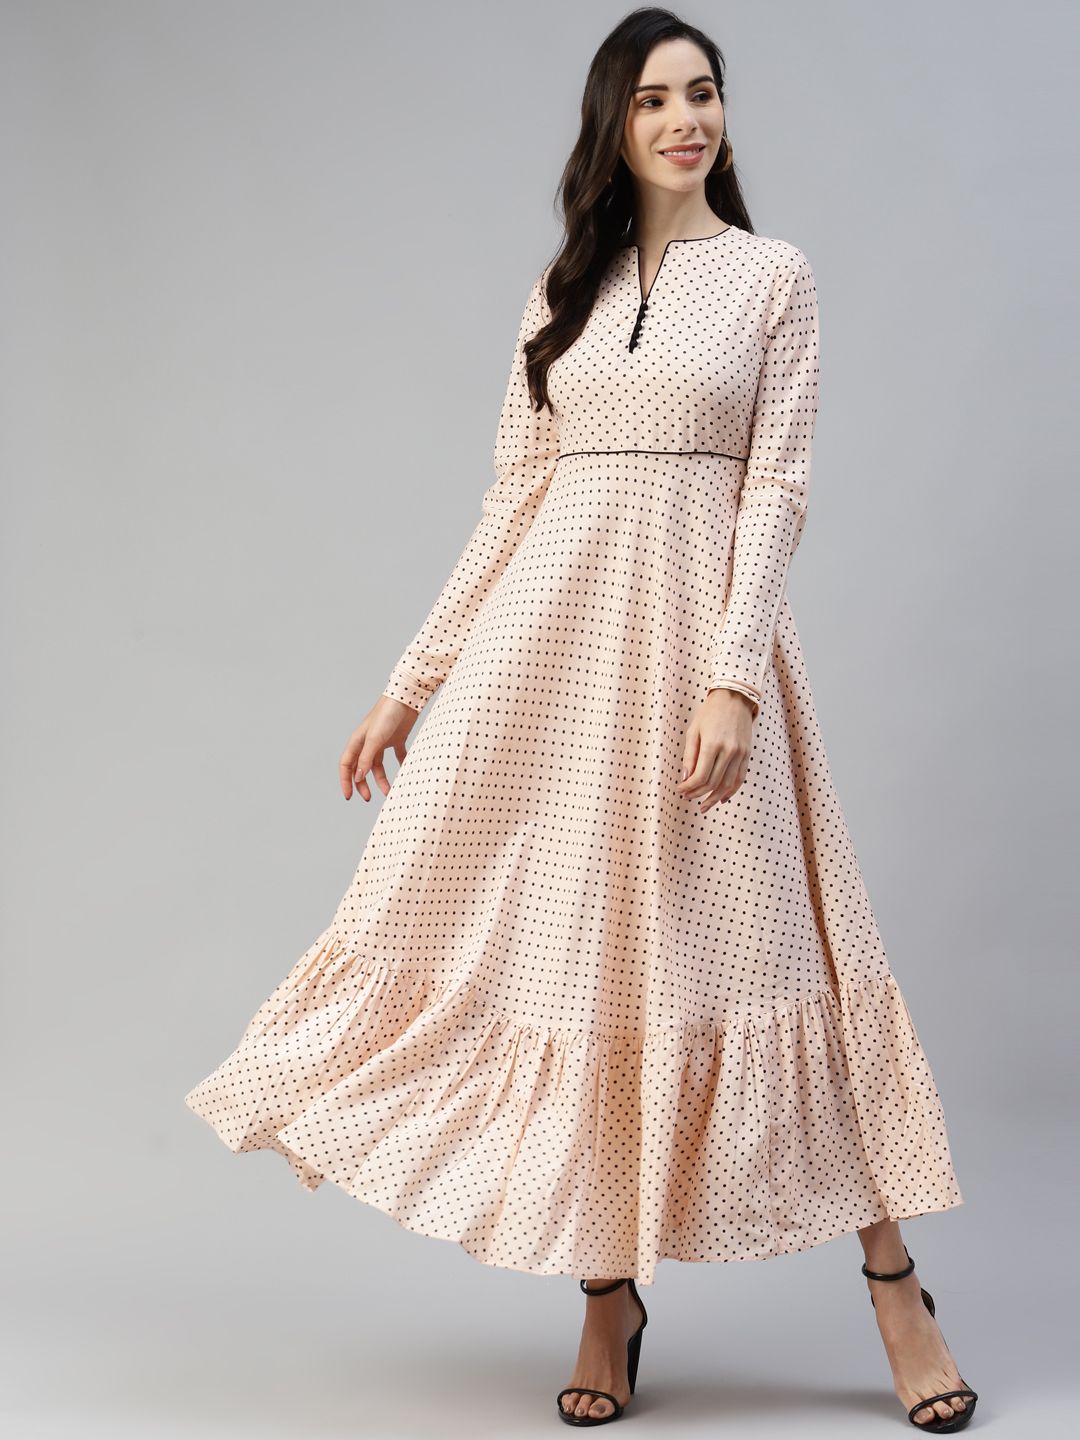 MBE Peach-Coloured & Black Polka Dots Printed Ethnic Maxi Dress Price in India